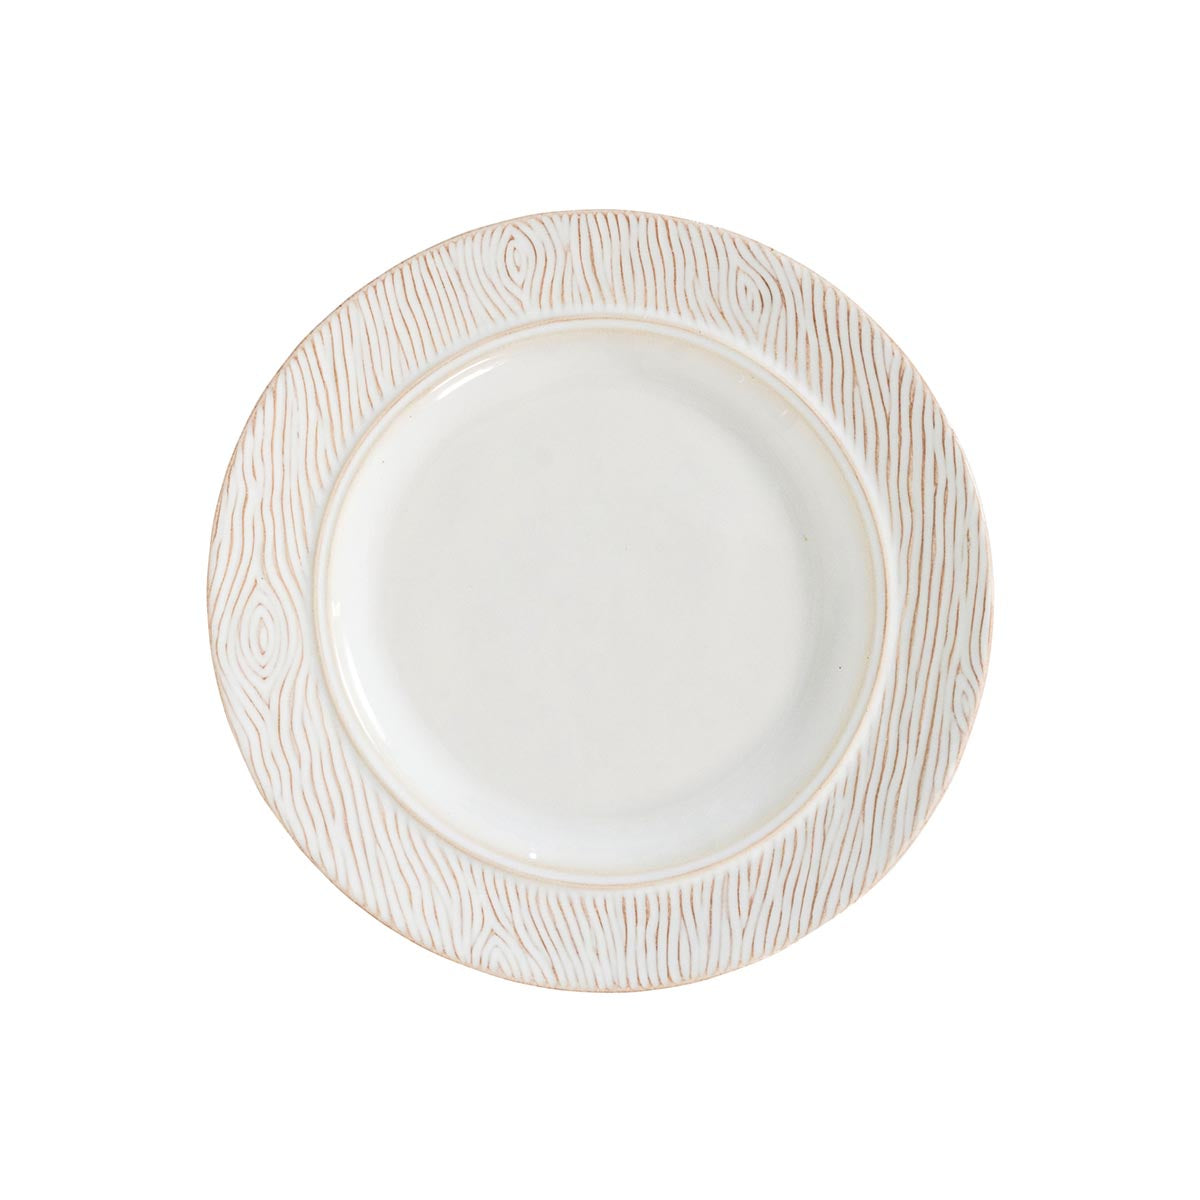 Inspired by the oldest grove of oak trees in England’s Blenheim Park, this woodgrain textured collection is rendered in a fresh and peaceful palette of creams and warm browns, with our signature whitewash glaze and a patina to highlight the beautifully rich motif. Equally idyllic and chic, this versatile plate makes an eye-catching layering piece with other patterns and collections, and serves up side dishes, canapés, and nibbles with easy style and grace.